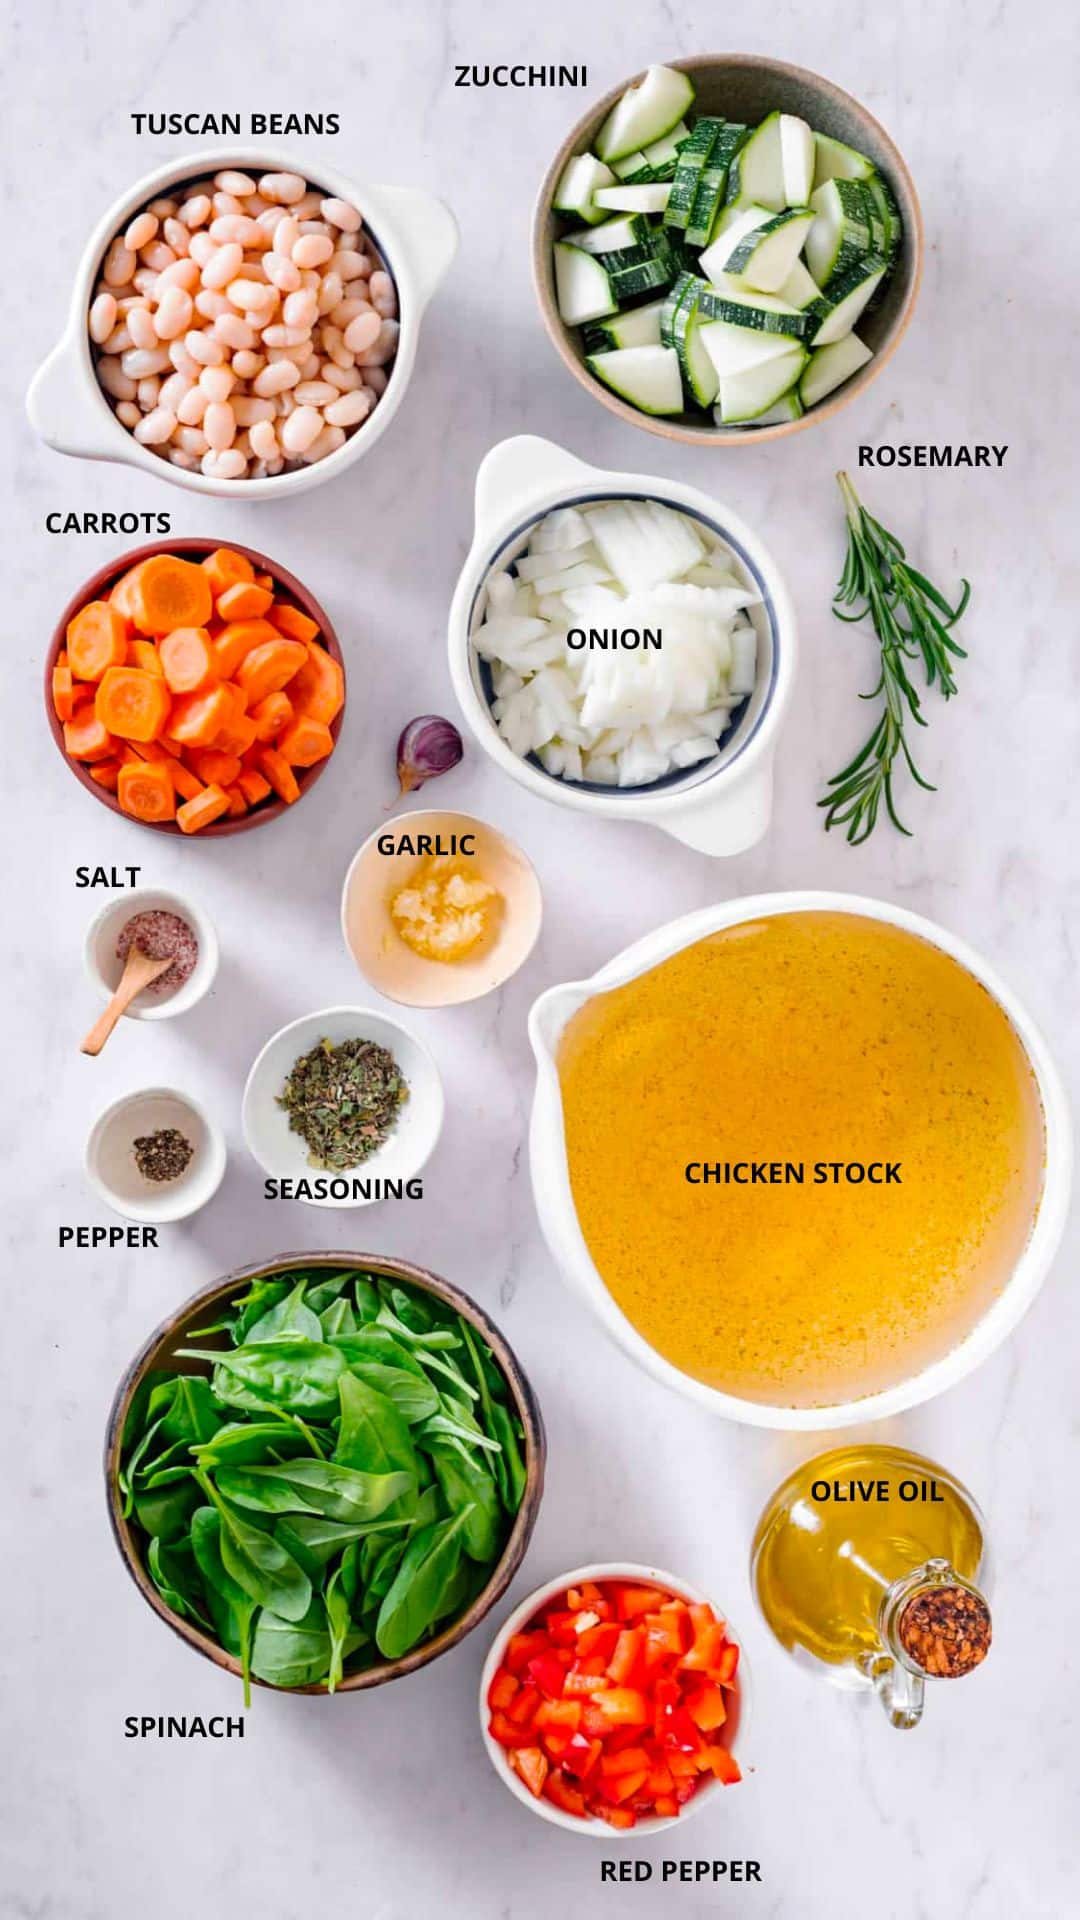 tuscan soup ingredients- zucchini, rosemary, tuscan beans, carrots, onion, garlic, salt, pepper, seasoning, chicken stock, olive oil, spinach, and red pepper.